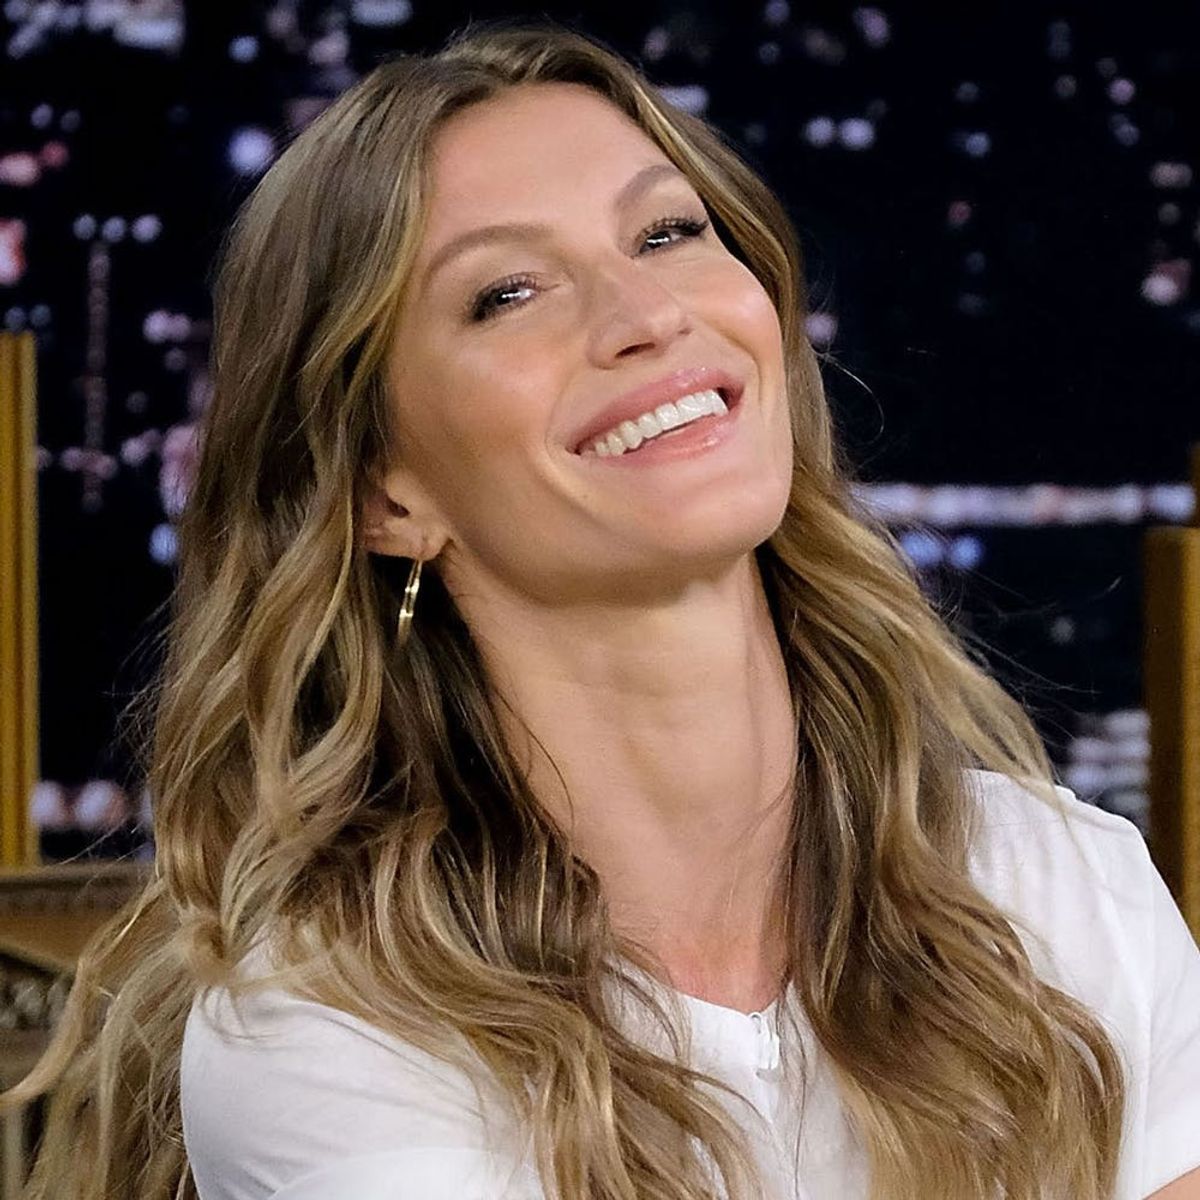 Gisele Bündchen Just Slayed the Cover of ‘Vogue Italia’ Without a Stitch of Makeup